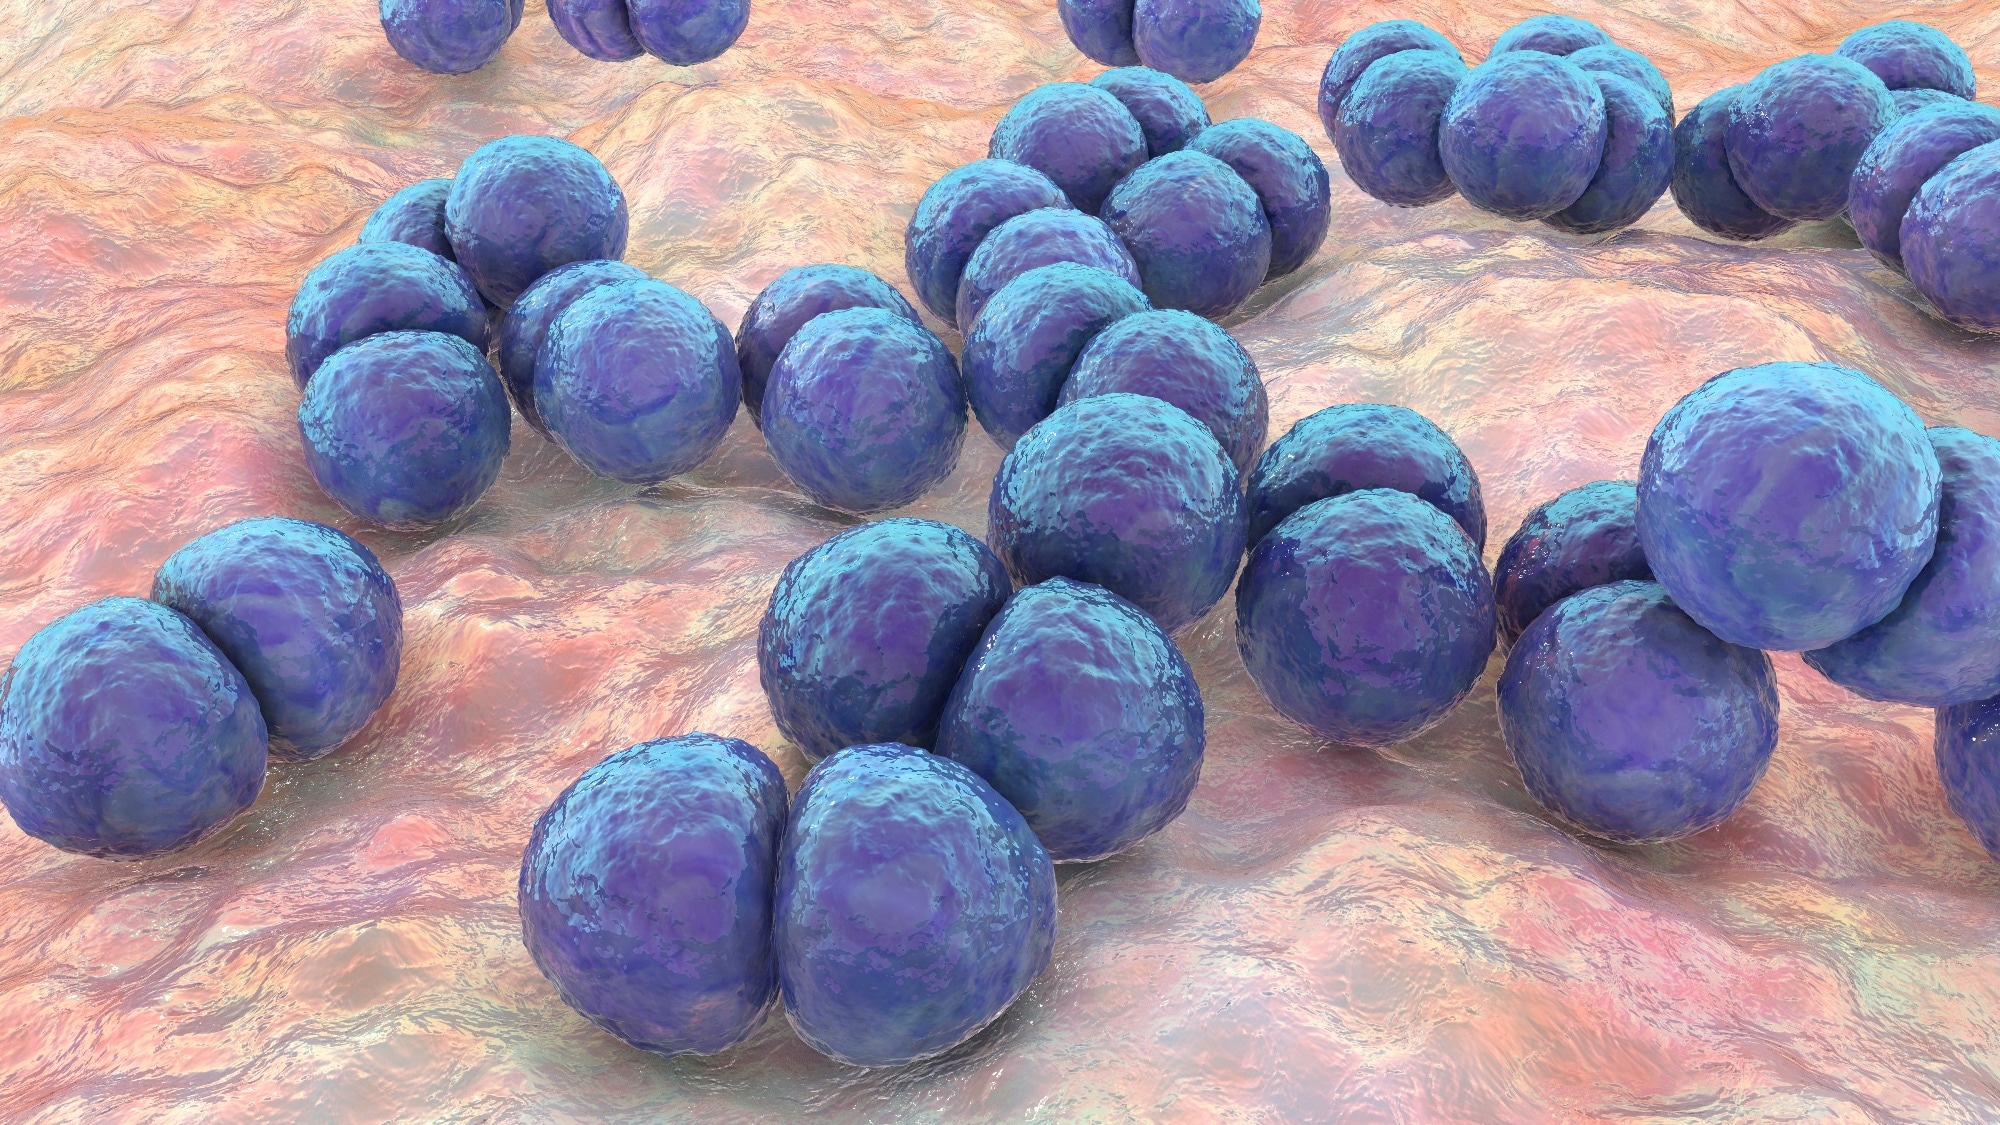 Pneumolysin as a target for new therapies against pneumococcal infections: A systematic review. Image Credit: Kateryna Kon / Shutterstock